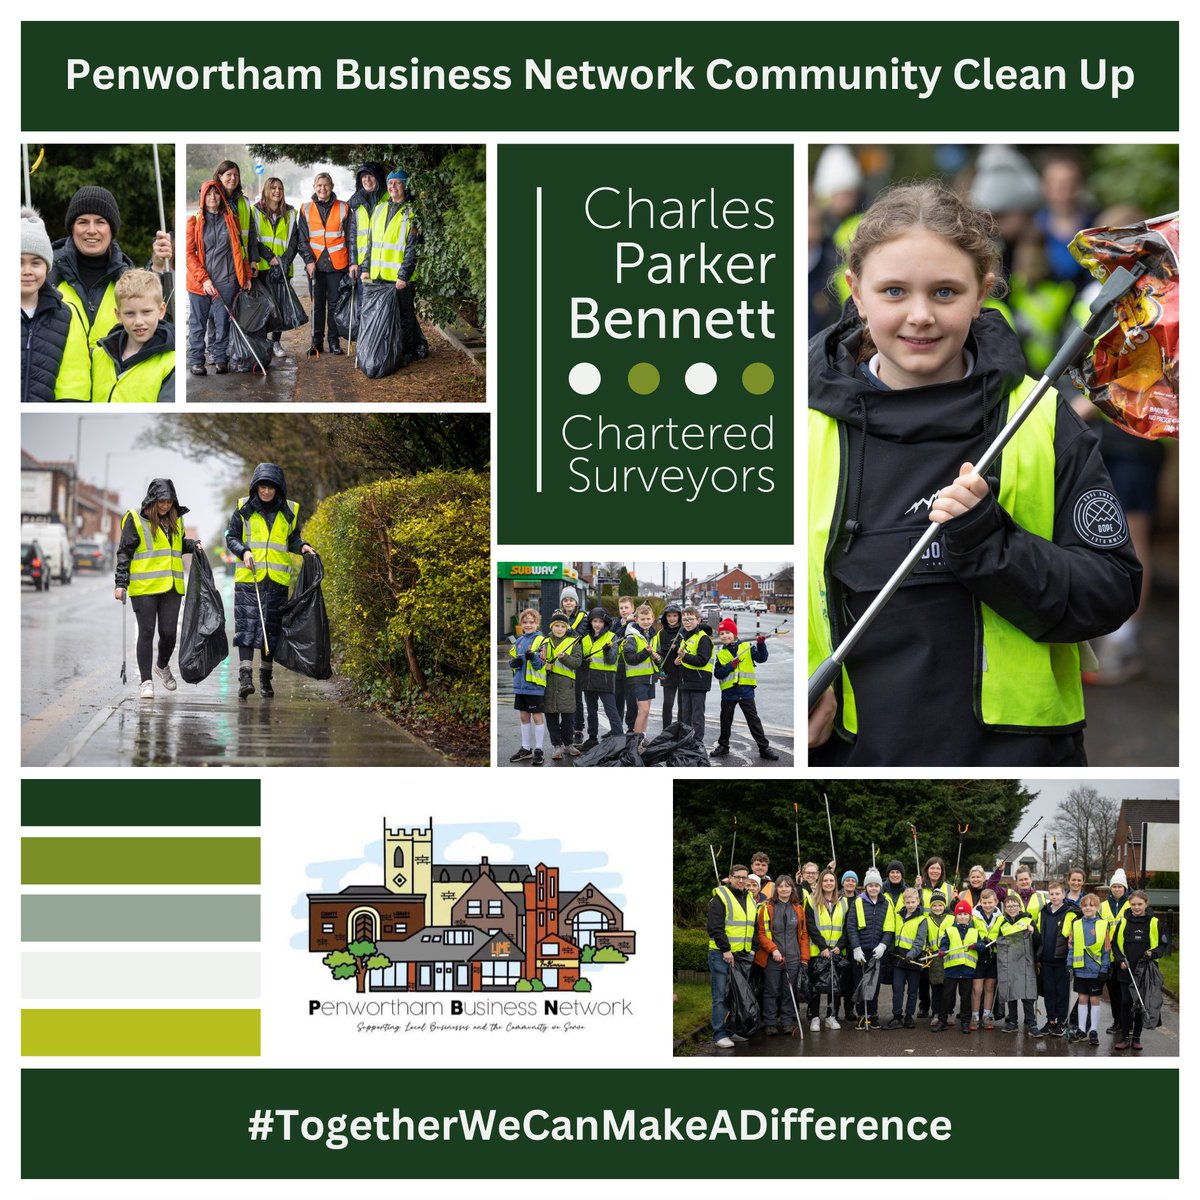 We pride ourselves on getting involved with local community networks and at the start of 2023 Mel from our Preston office reached out to Penwortham Business Networking group.  First event - Community Clean Up.

#CommunityPride #TogetherWeCanMakeADifference #CharlesParkerBennett